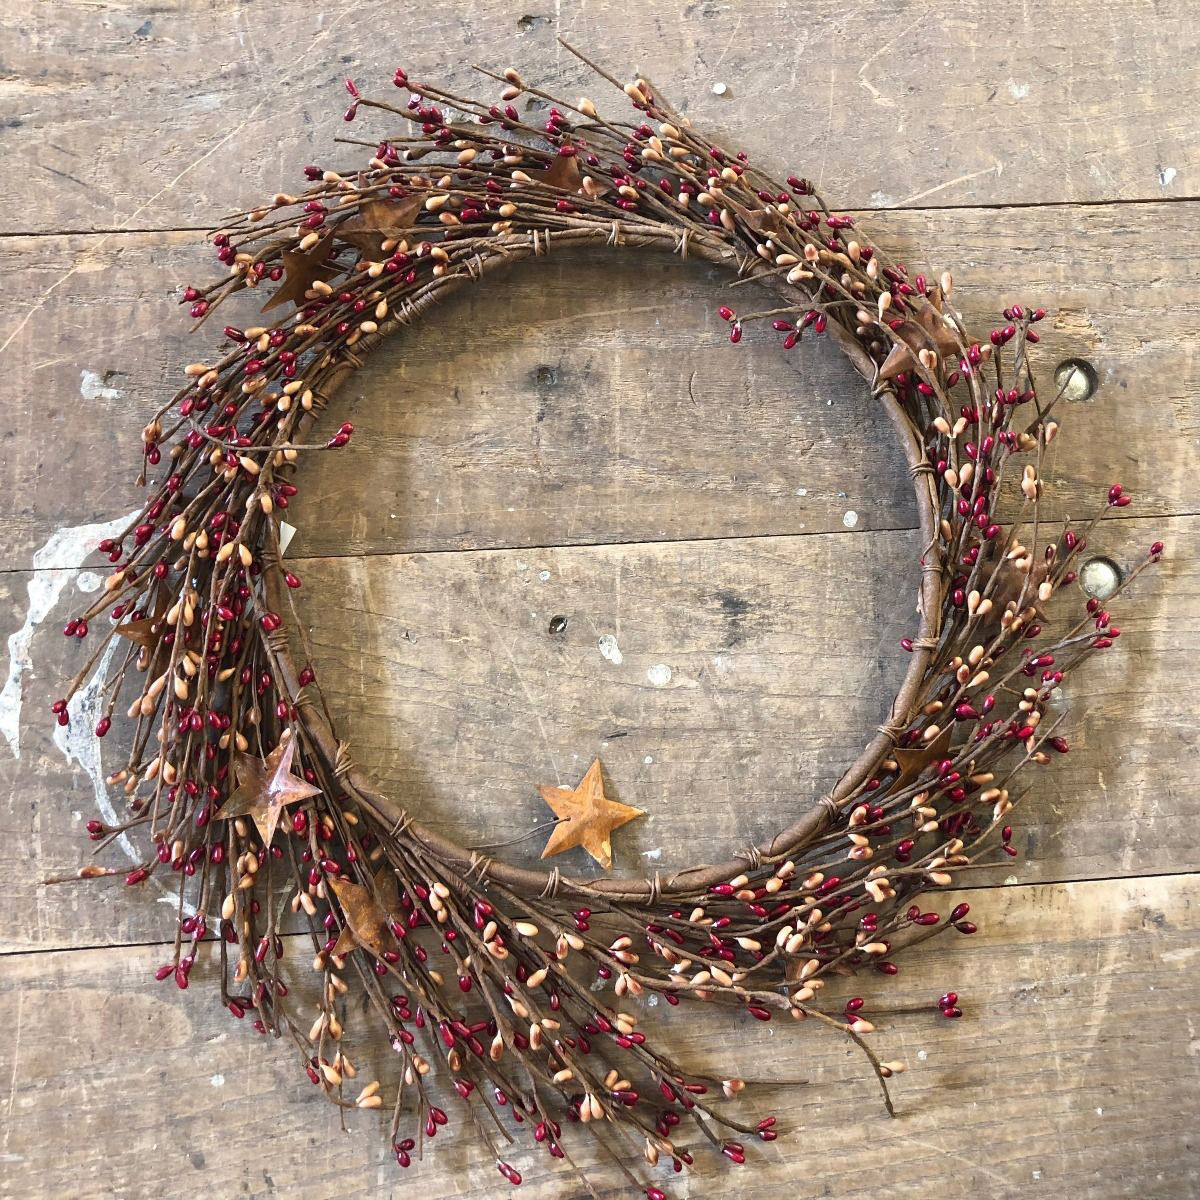 New Primitive Country Wreath BLACK TEA STAIN Berry Wreath Pip Berries